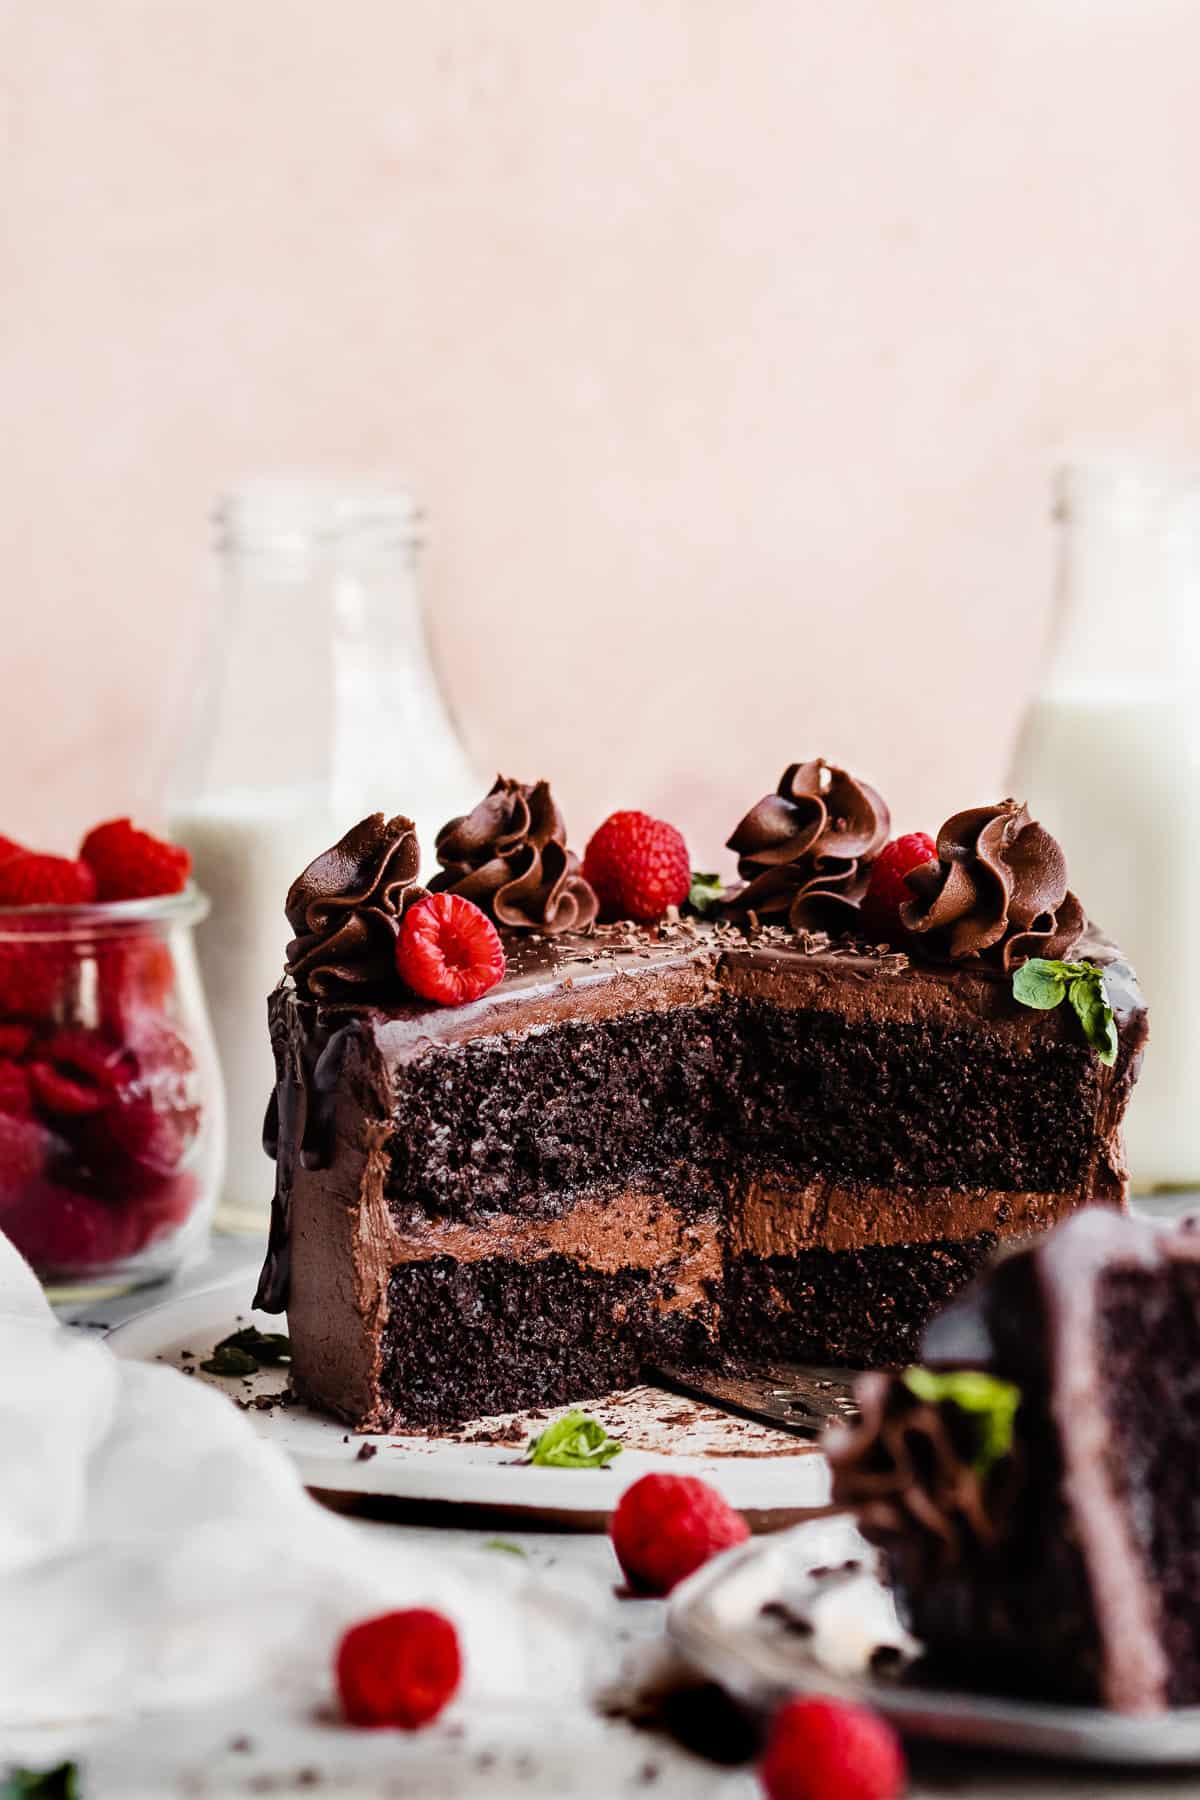 The sliced open cake, revealing the fudgy insides, with raspberries and chocolate frosting swirls on top.